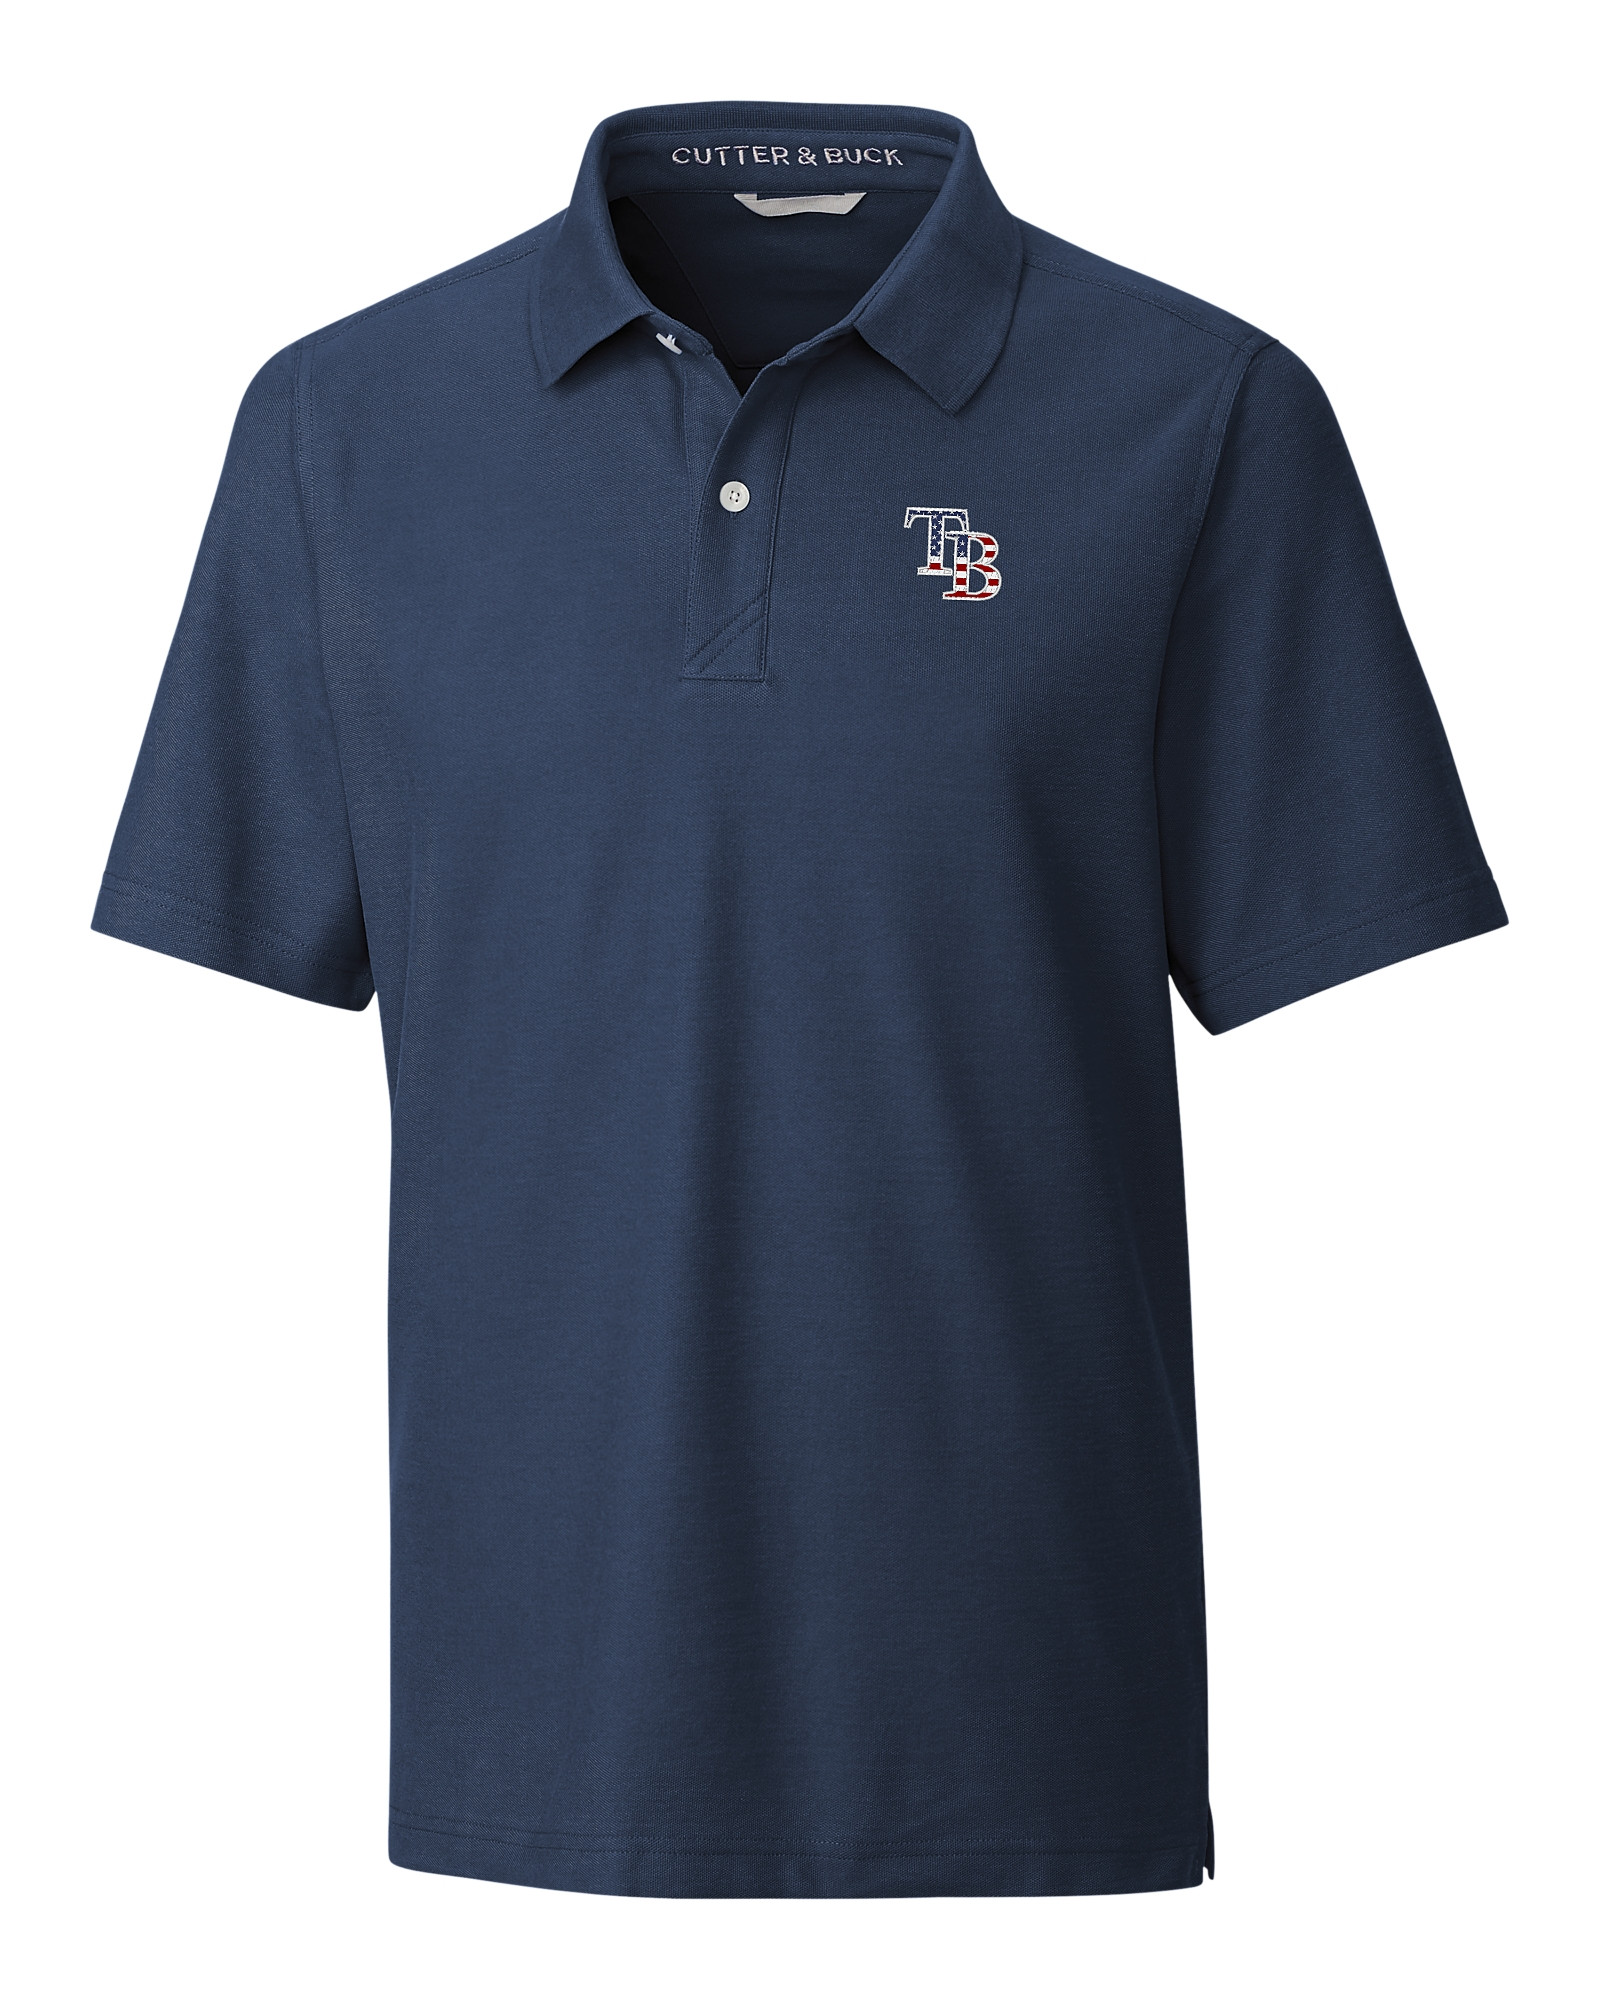 tampa bay rays men's polo